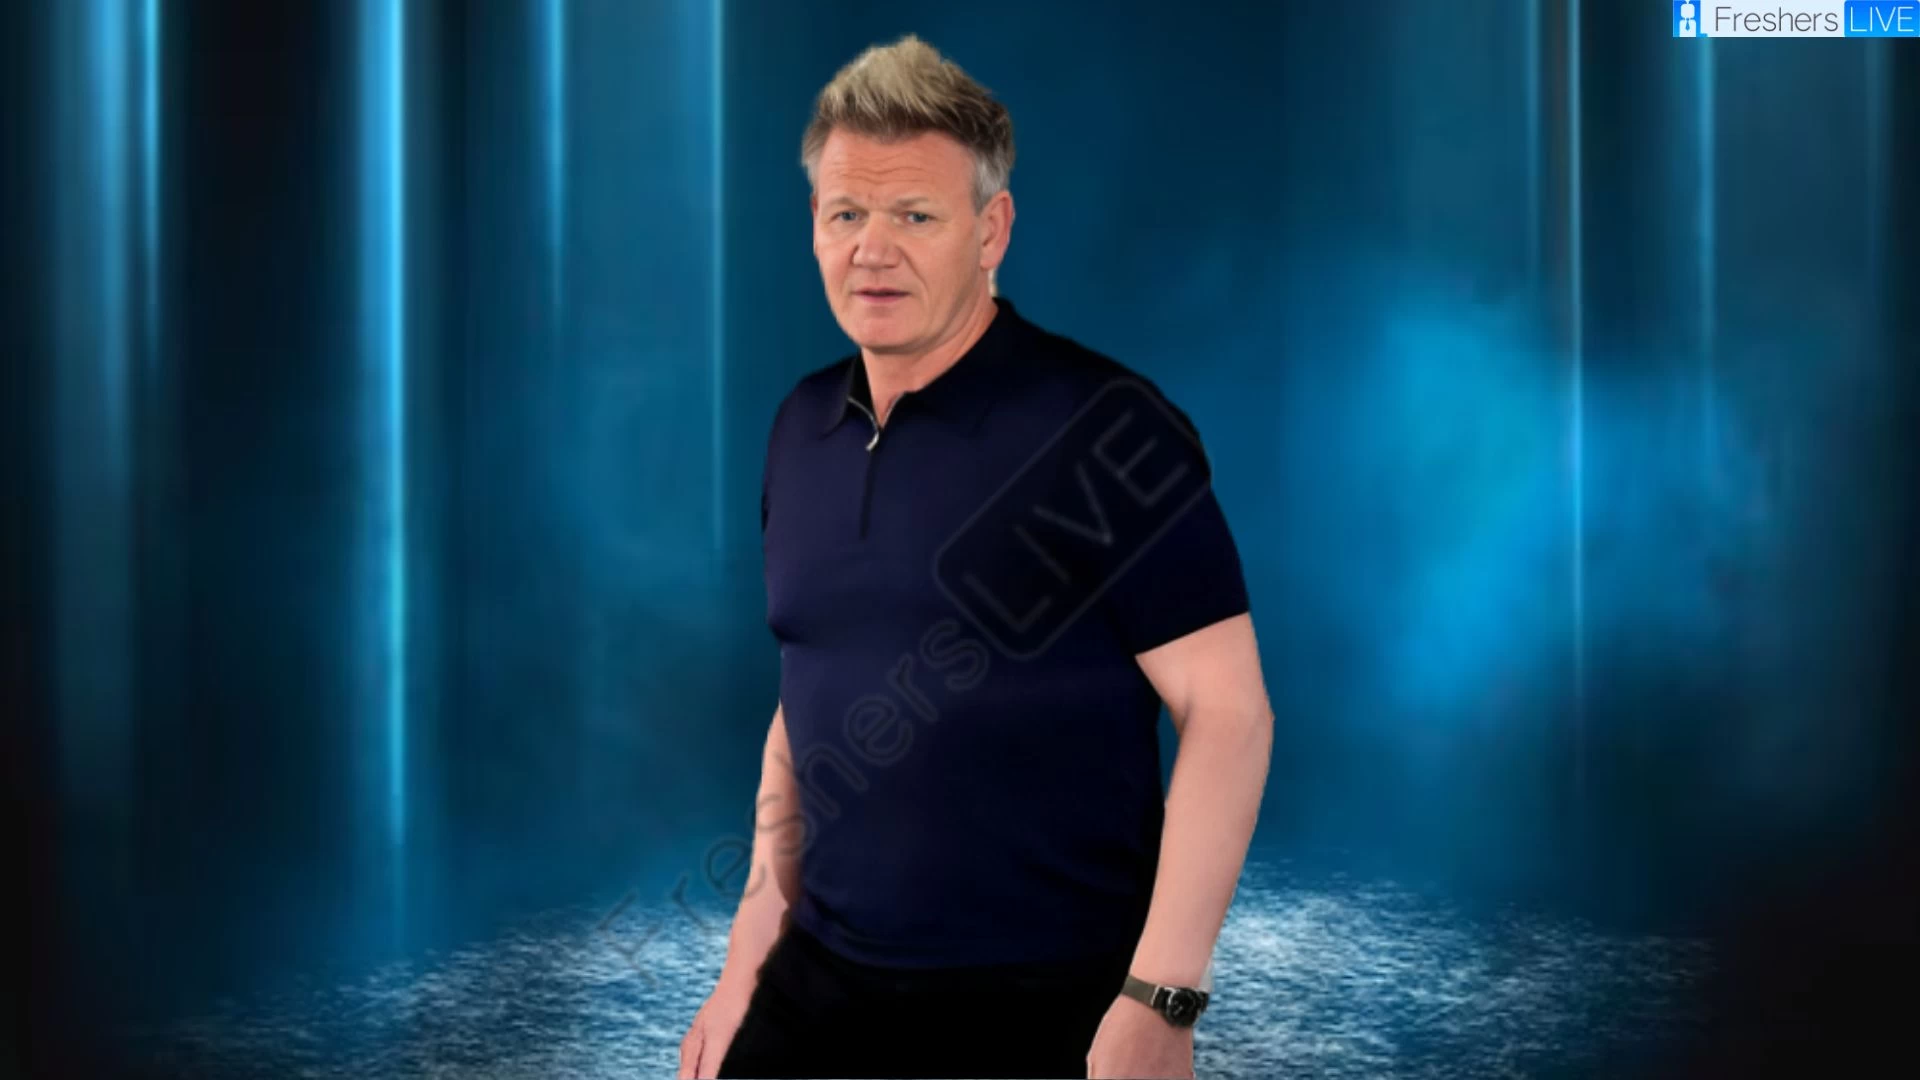 Kitchen Nightmares Season 8 Episode 3 Release Date and Time, Countdown, When is it Coming Out?